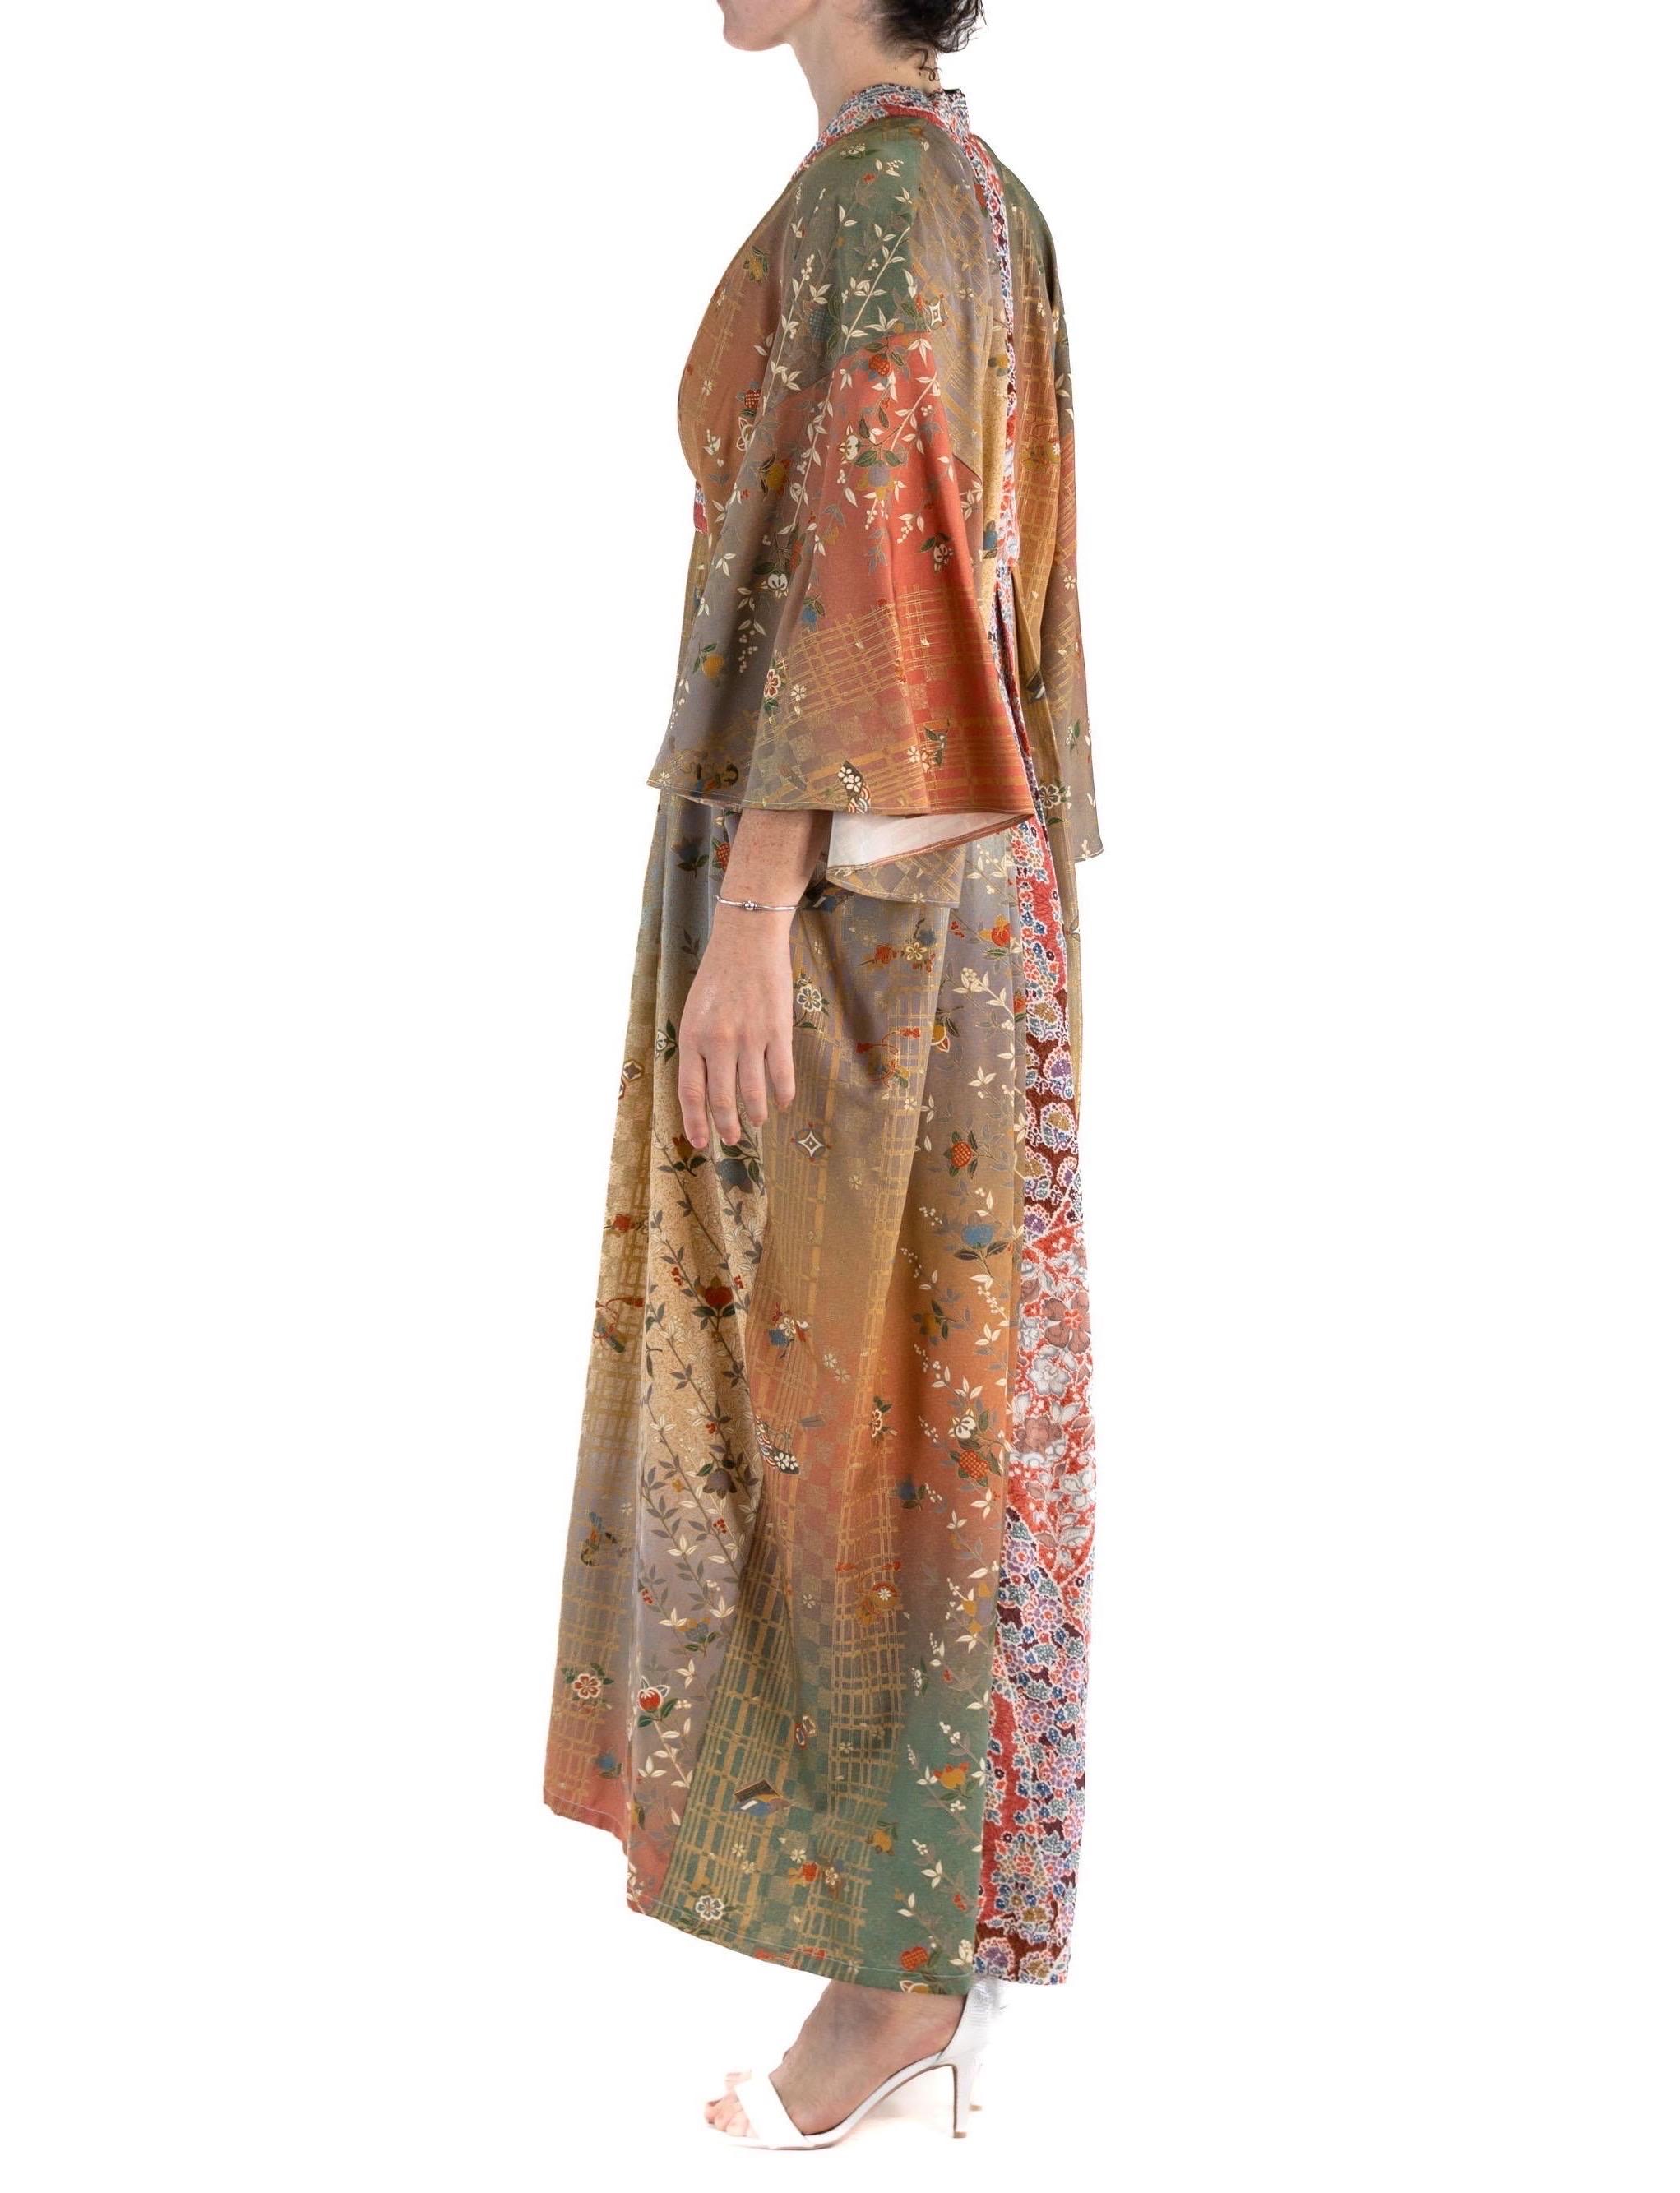 MORPHEW COLLECTION Orange Grey Japanese Kimono Silk Cherry Blossom Kaftan In Excellent Condition For Sale In New York, NY